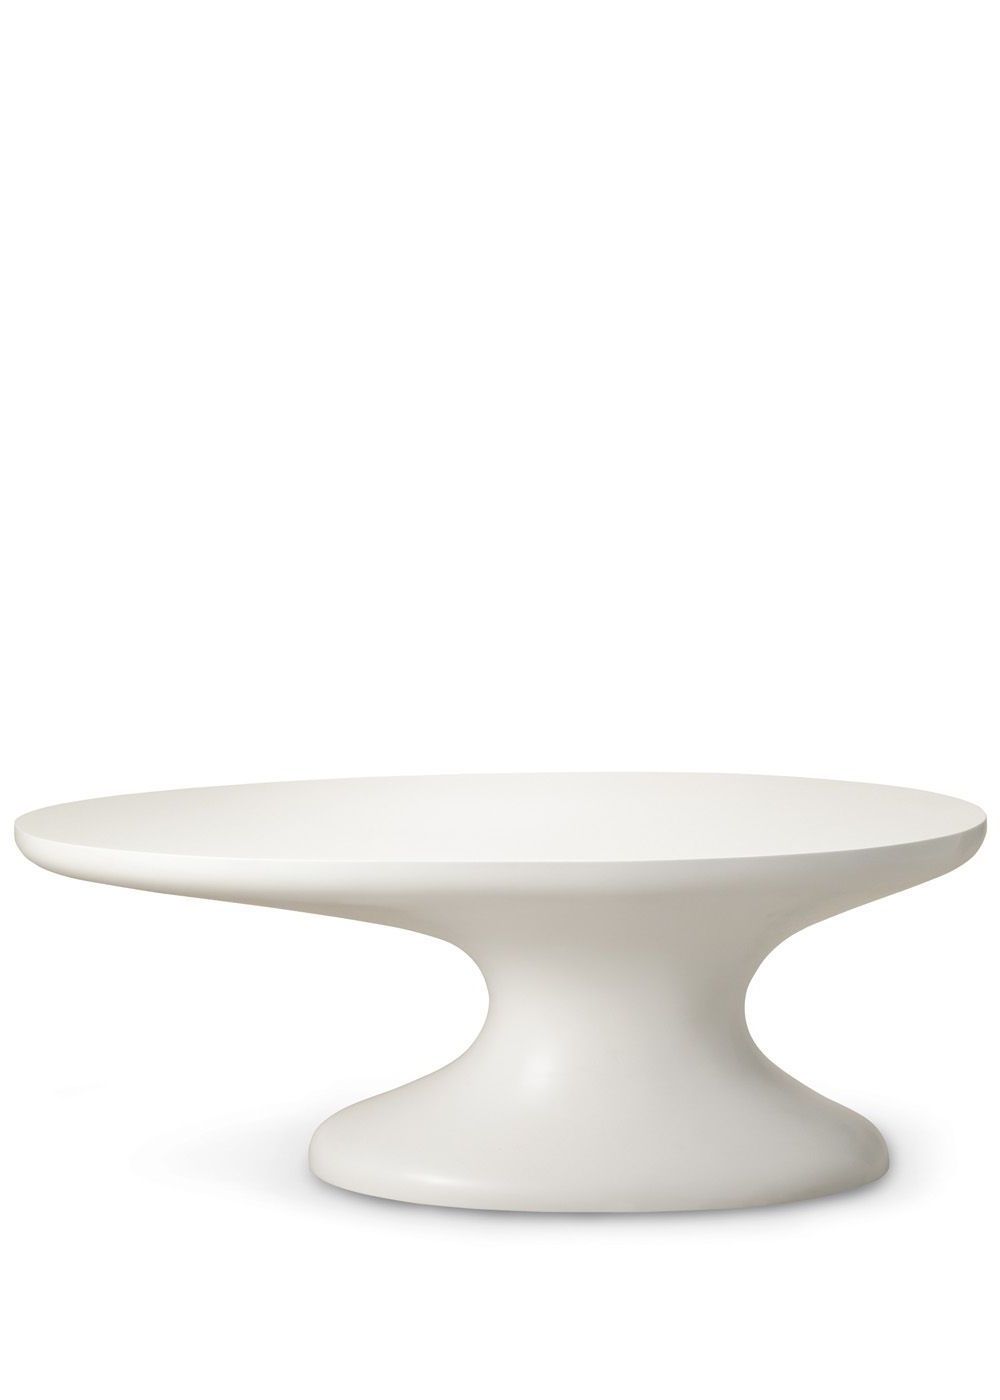 Well Liked Image Result For Stratus Cocktail Table – White #t3001 W For Stratus Cocktail Tables (View 3 of 20)